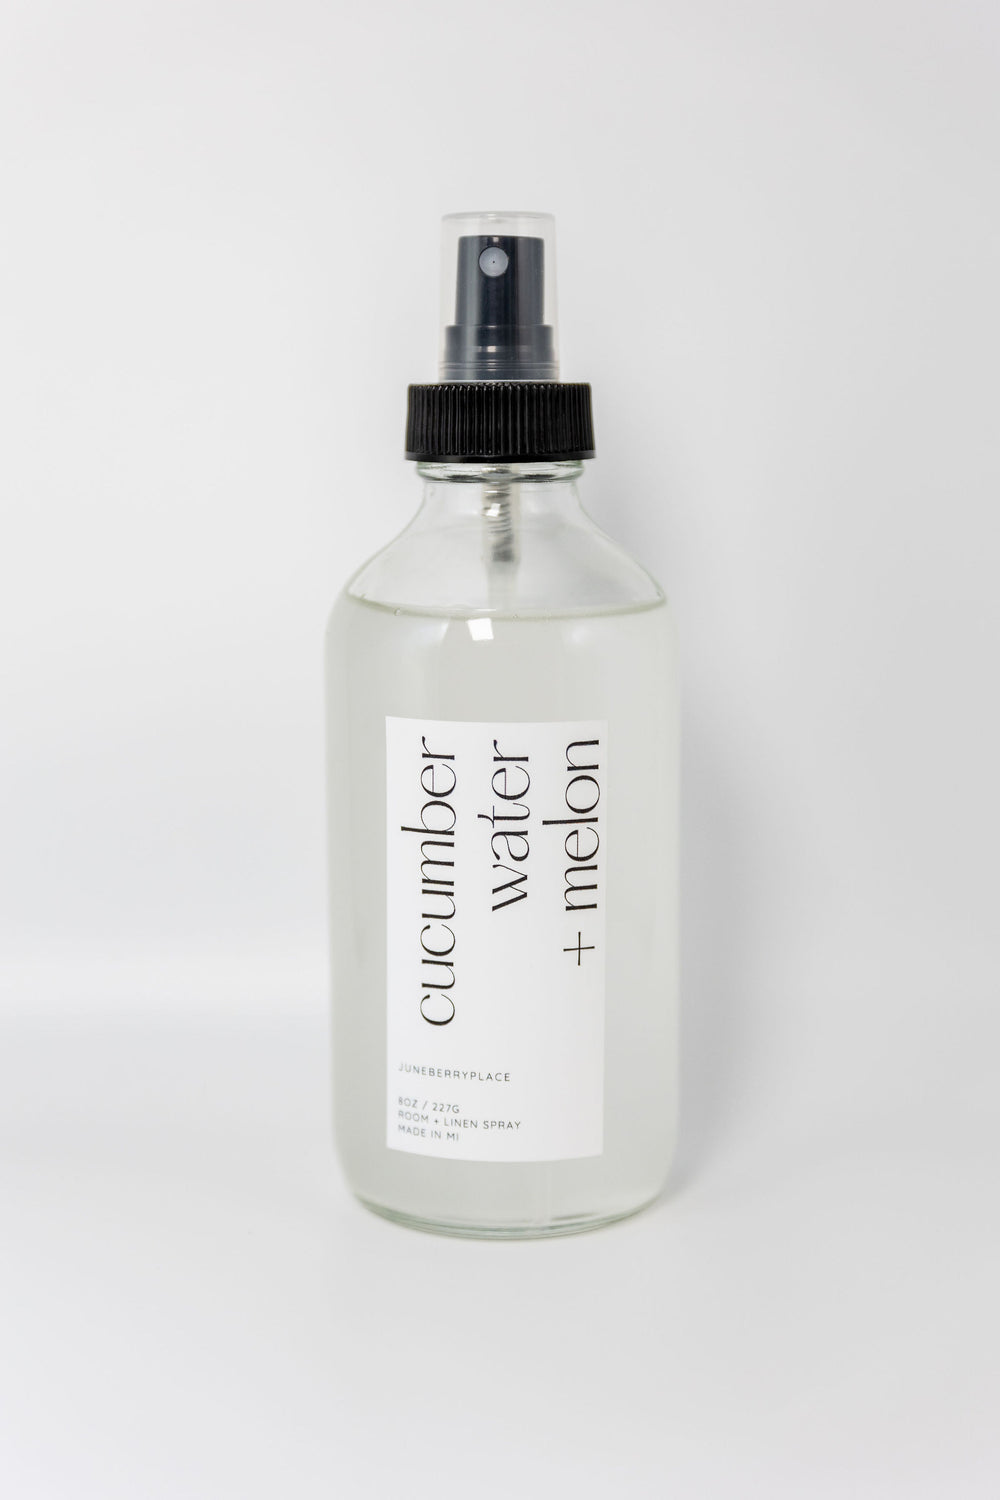 Cucumber Water and Melon Room and Linen Spray - Spring Collection in a glass bottle by juneberryplace home fragrances